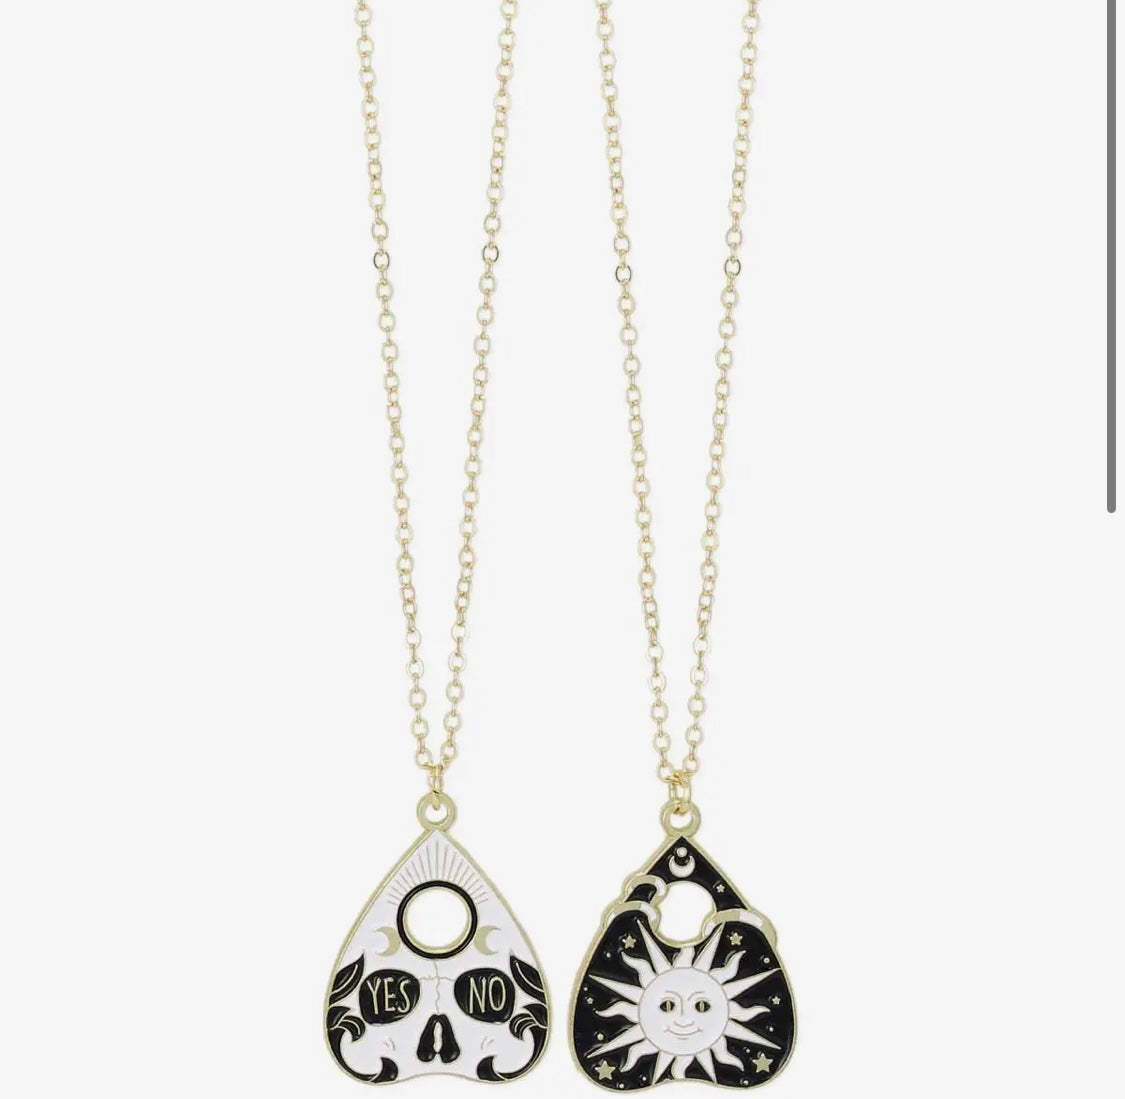 Tell My Fortune Black White Planchet Necklace